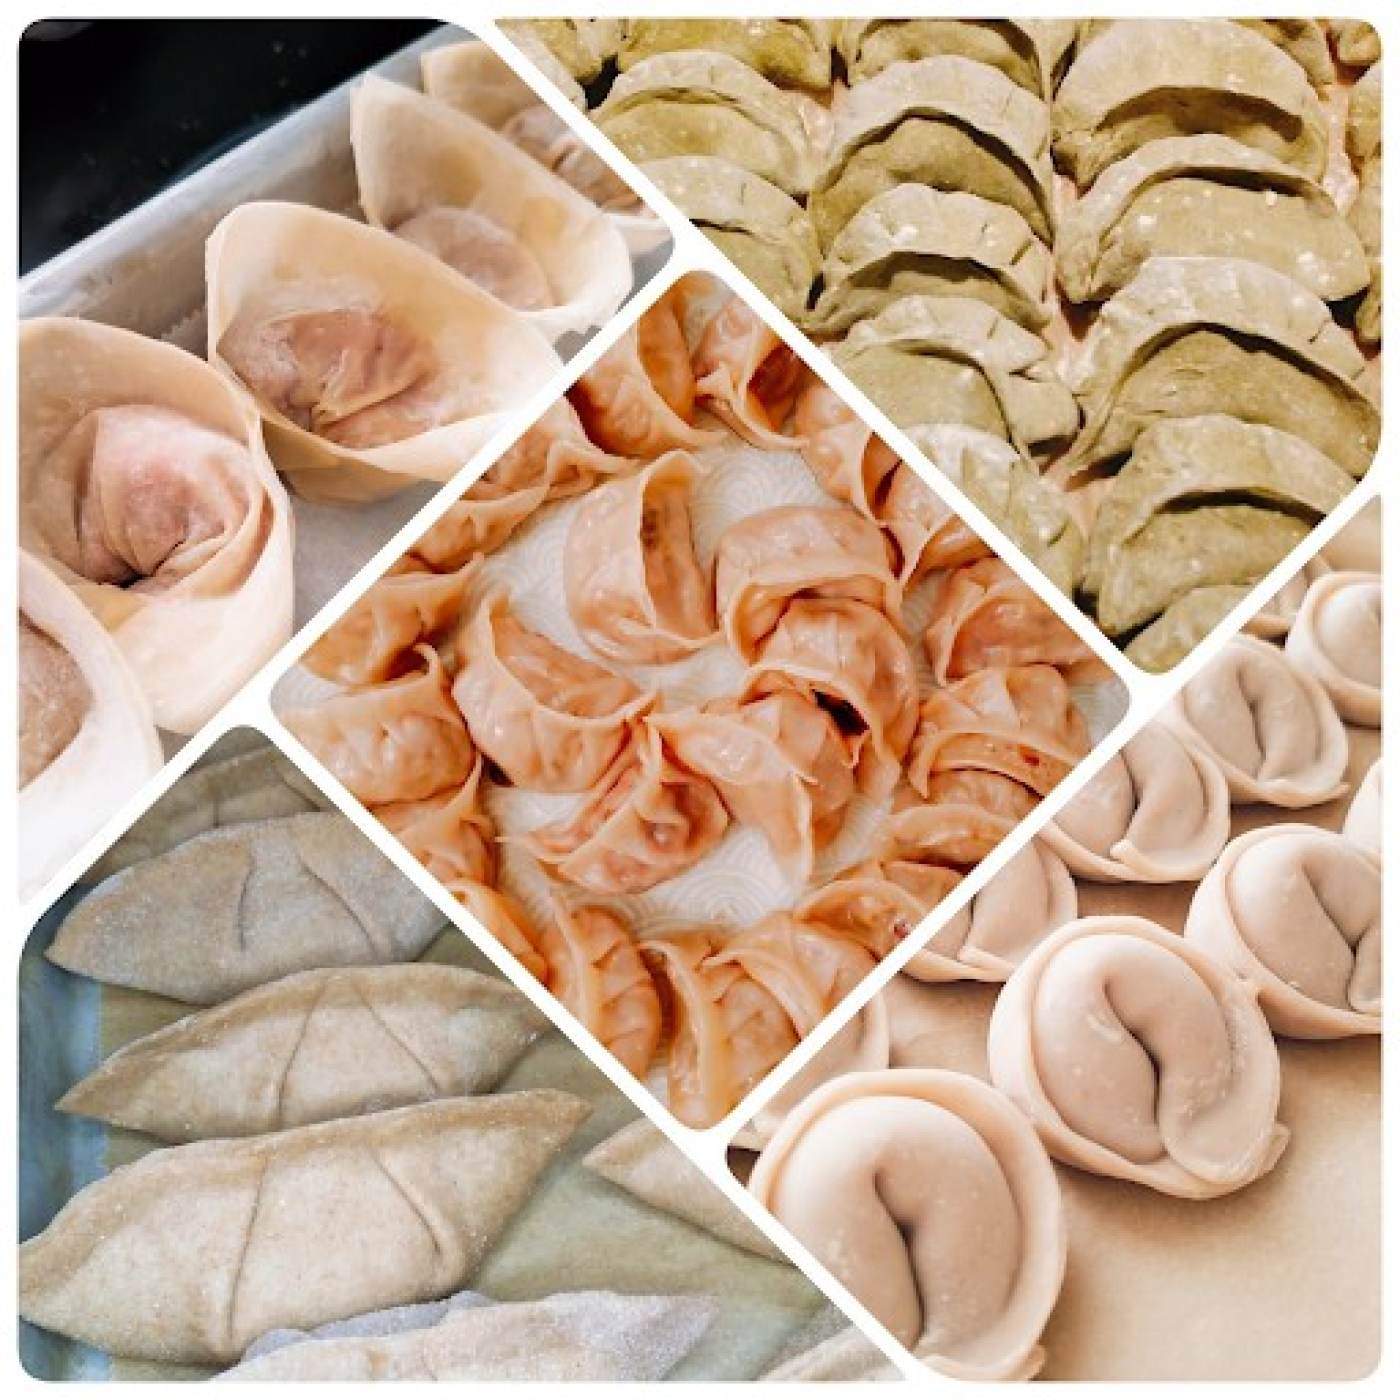 Dumplings folded in a variety of shapes.